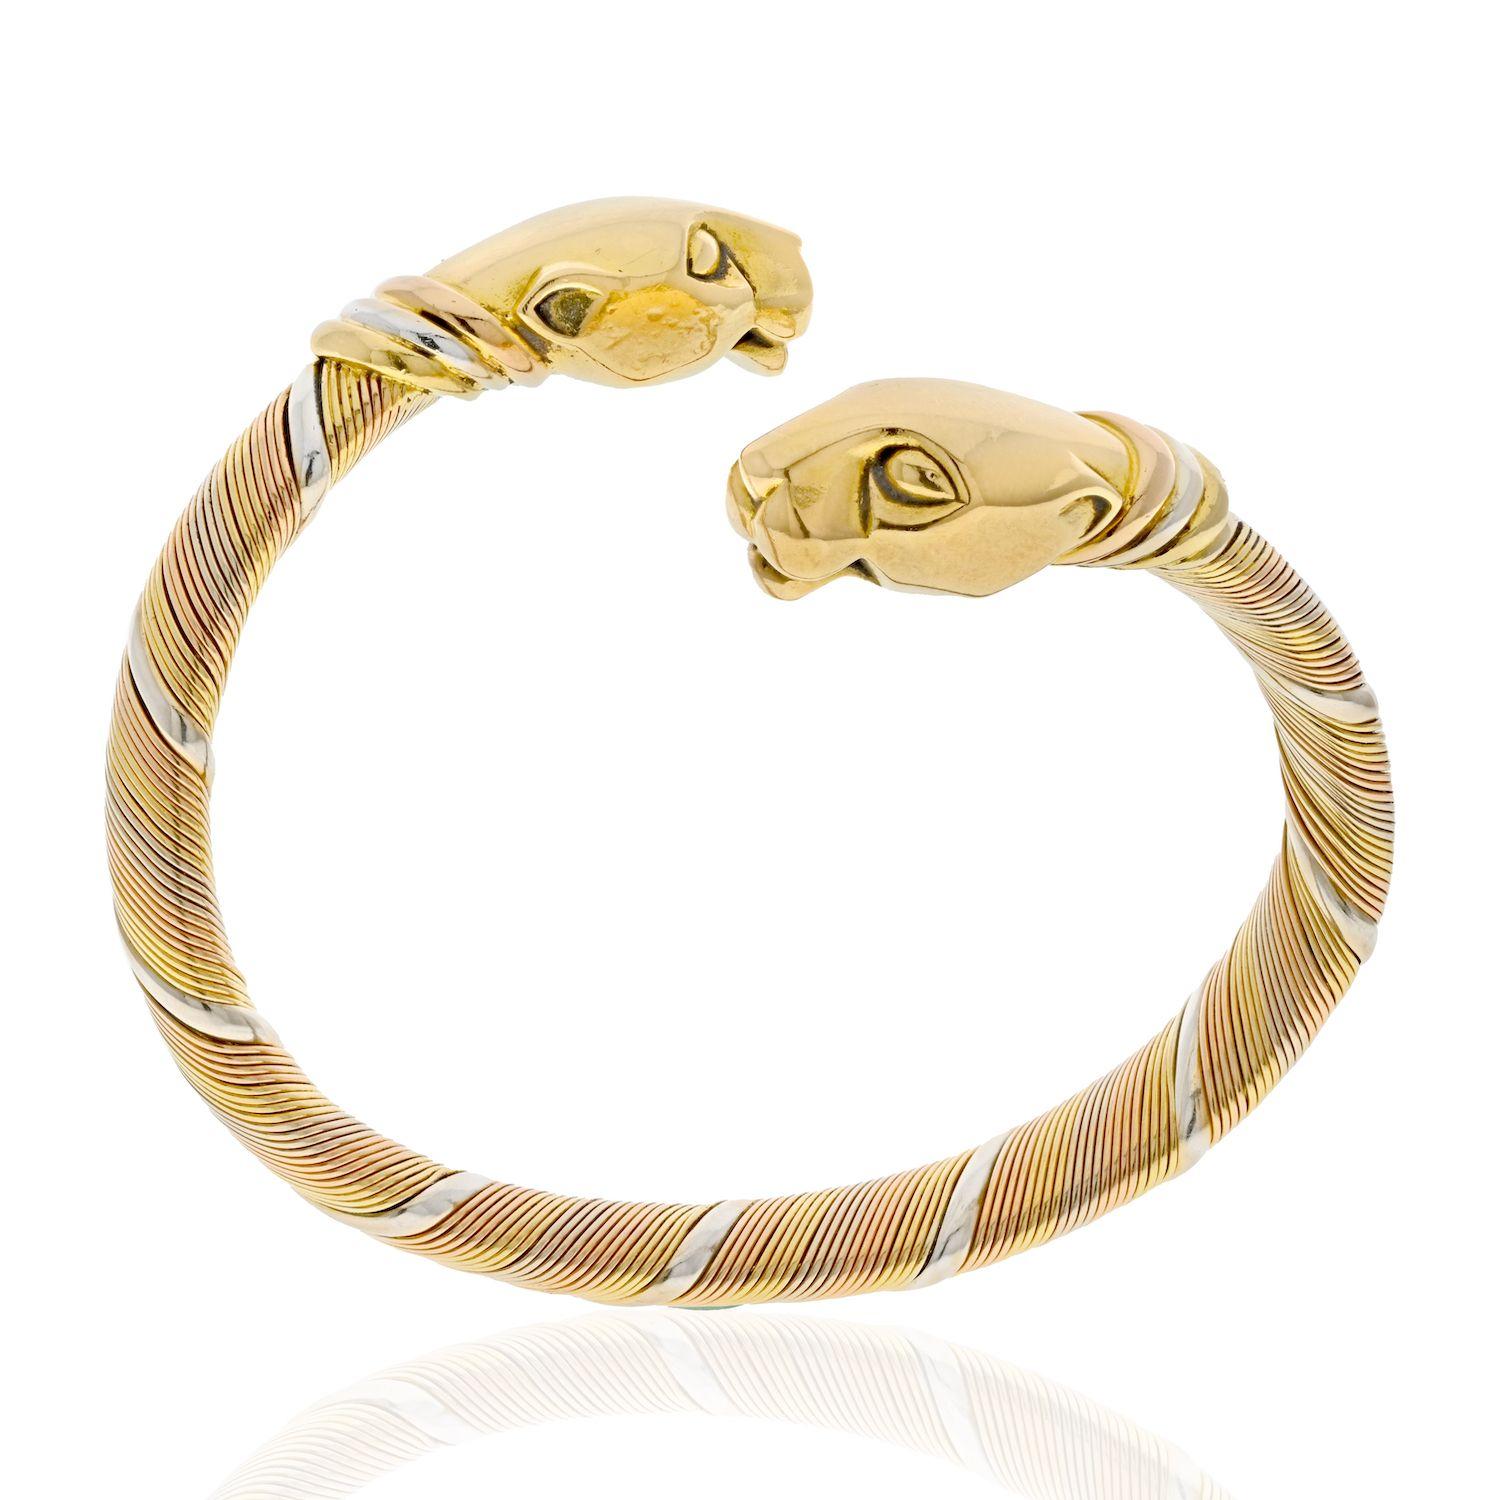 Cartier 18K Tri Color Double Cougar Vintage Panthere Cuff Bracelet.
Iconic design of two cougars on a coiled bracelet. 
Rare vntage Panthere De Cartier (Cougar) bangle bracelet crafted in coiled tri-color 18k gold. This bracelet features two solid